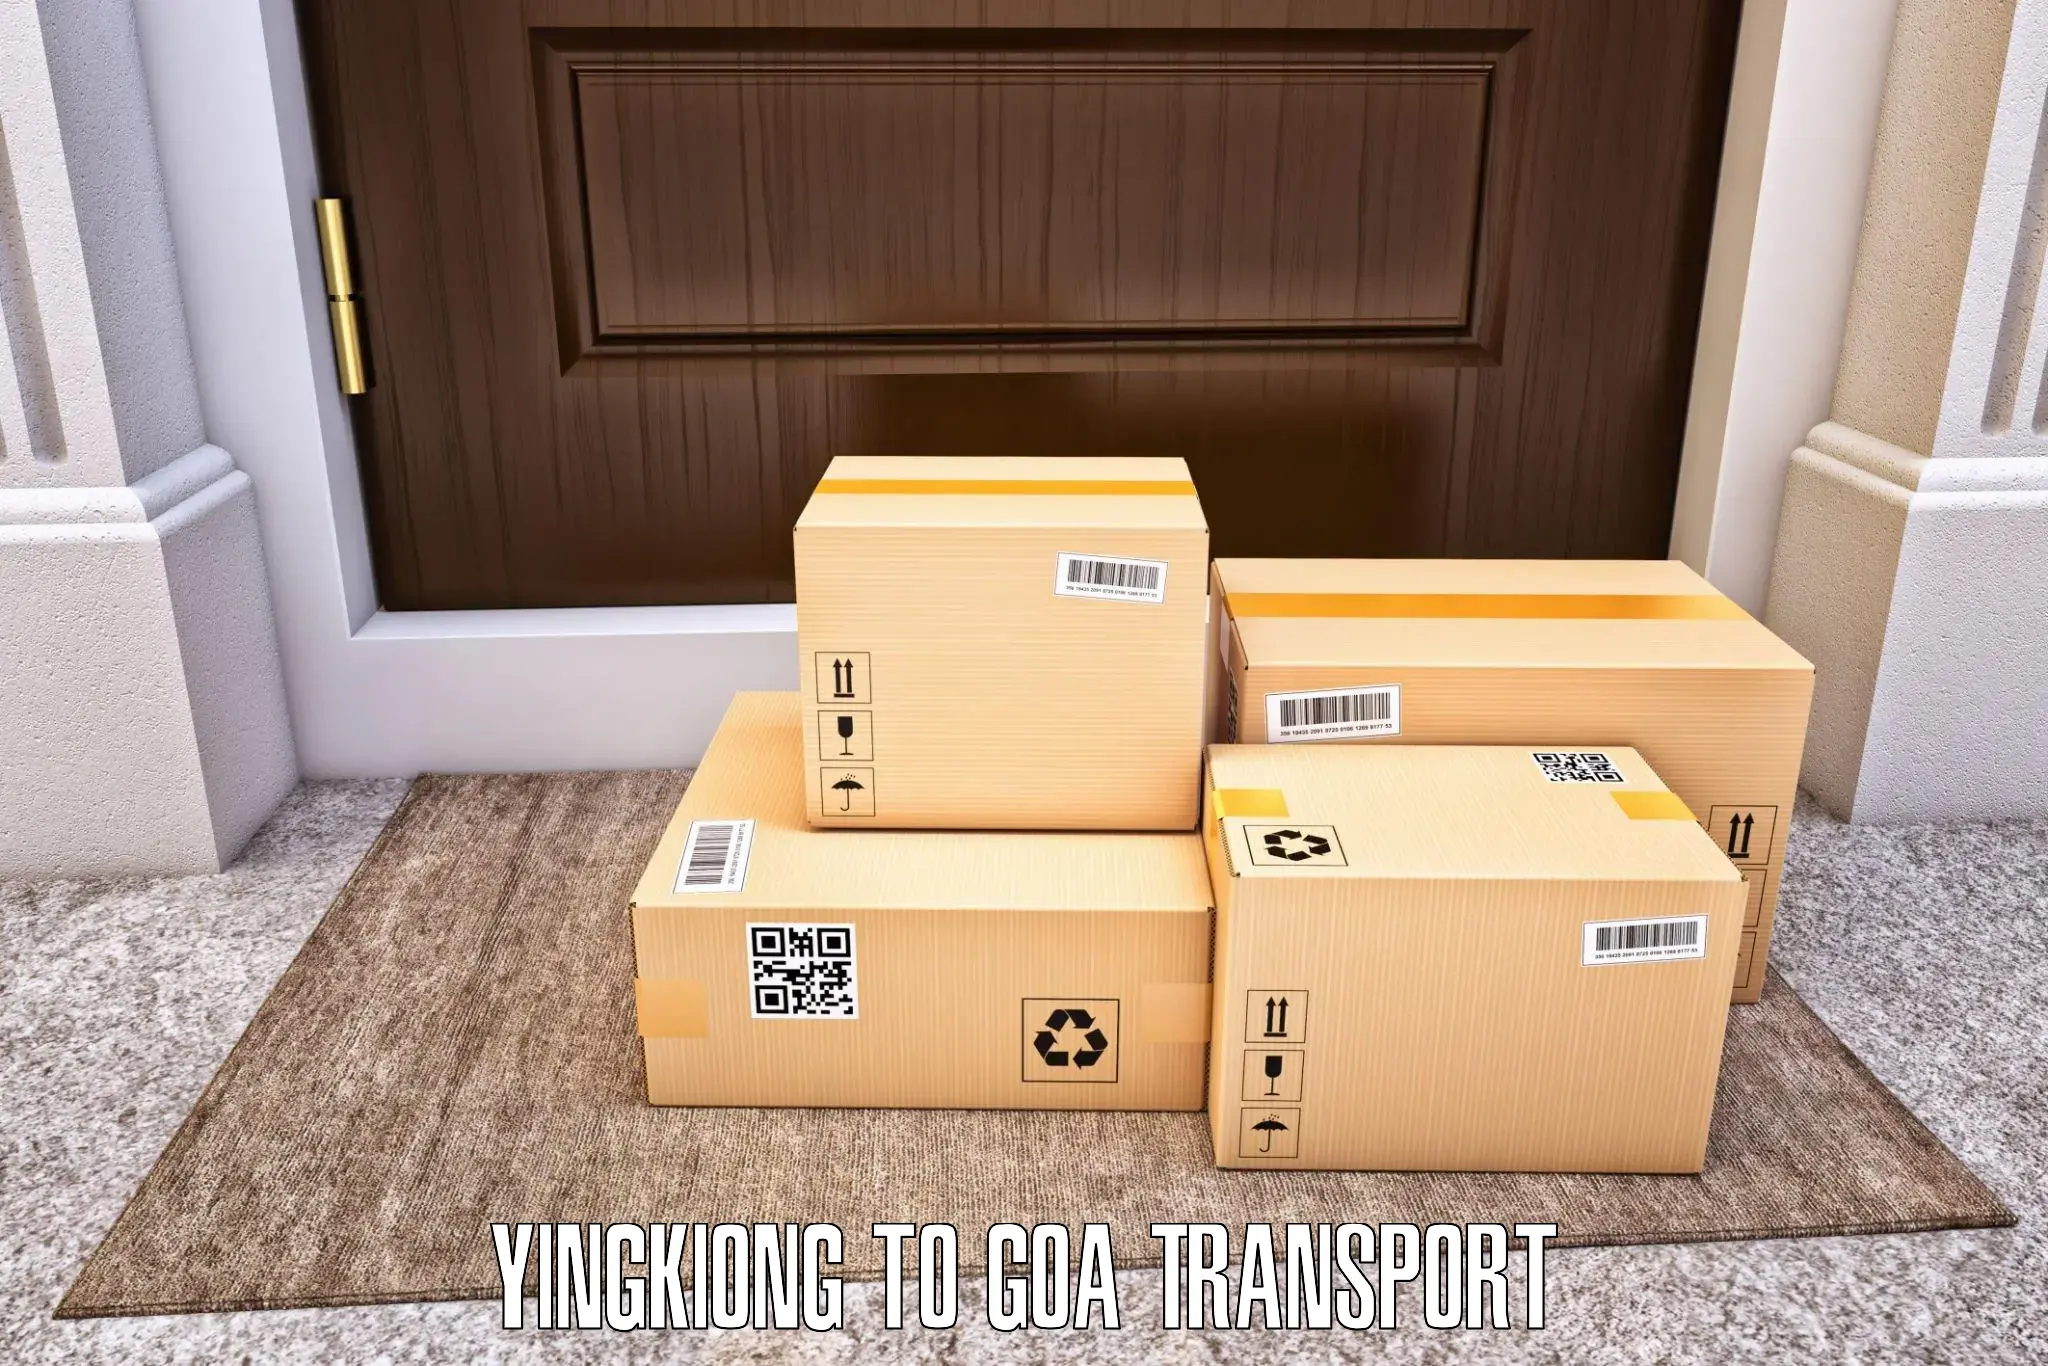 Furniture transport service in Yingkiong to Goa University